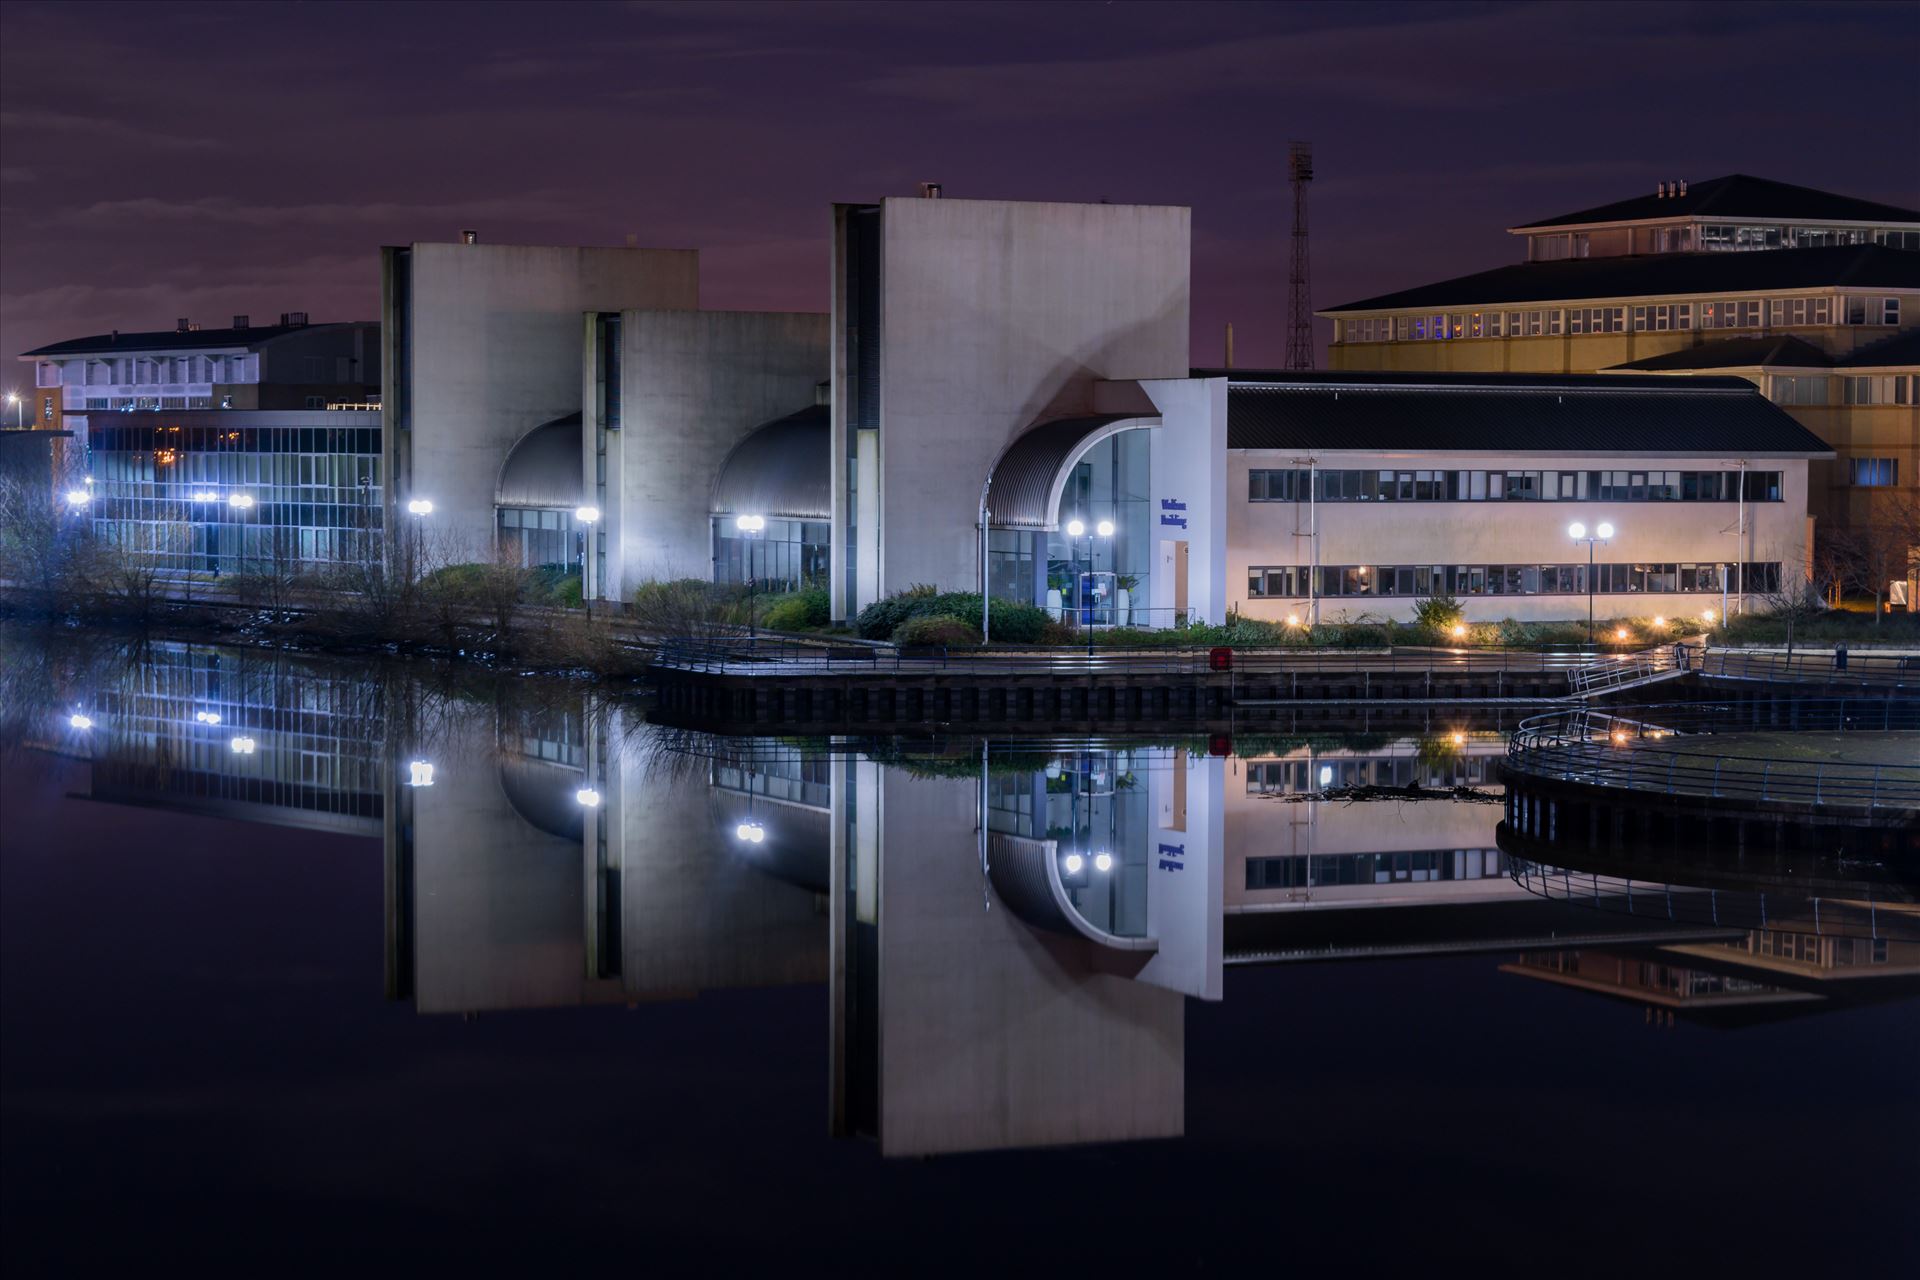 Wolfson Building, Queen's Campus, Durham University Taken on the Infinity Bridge on the 1st January 2018, couldn't believe how flat and still the water was this night by AJ Stoves Photography